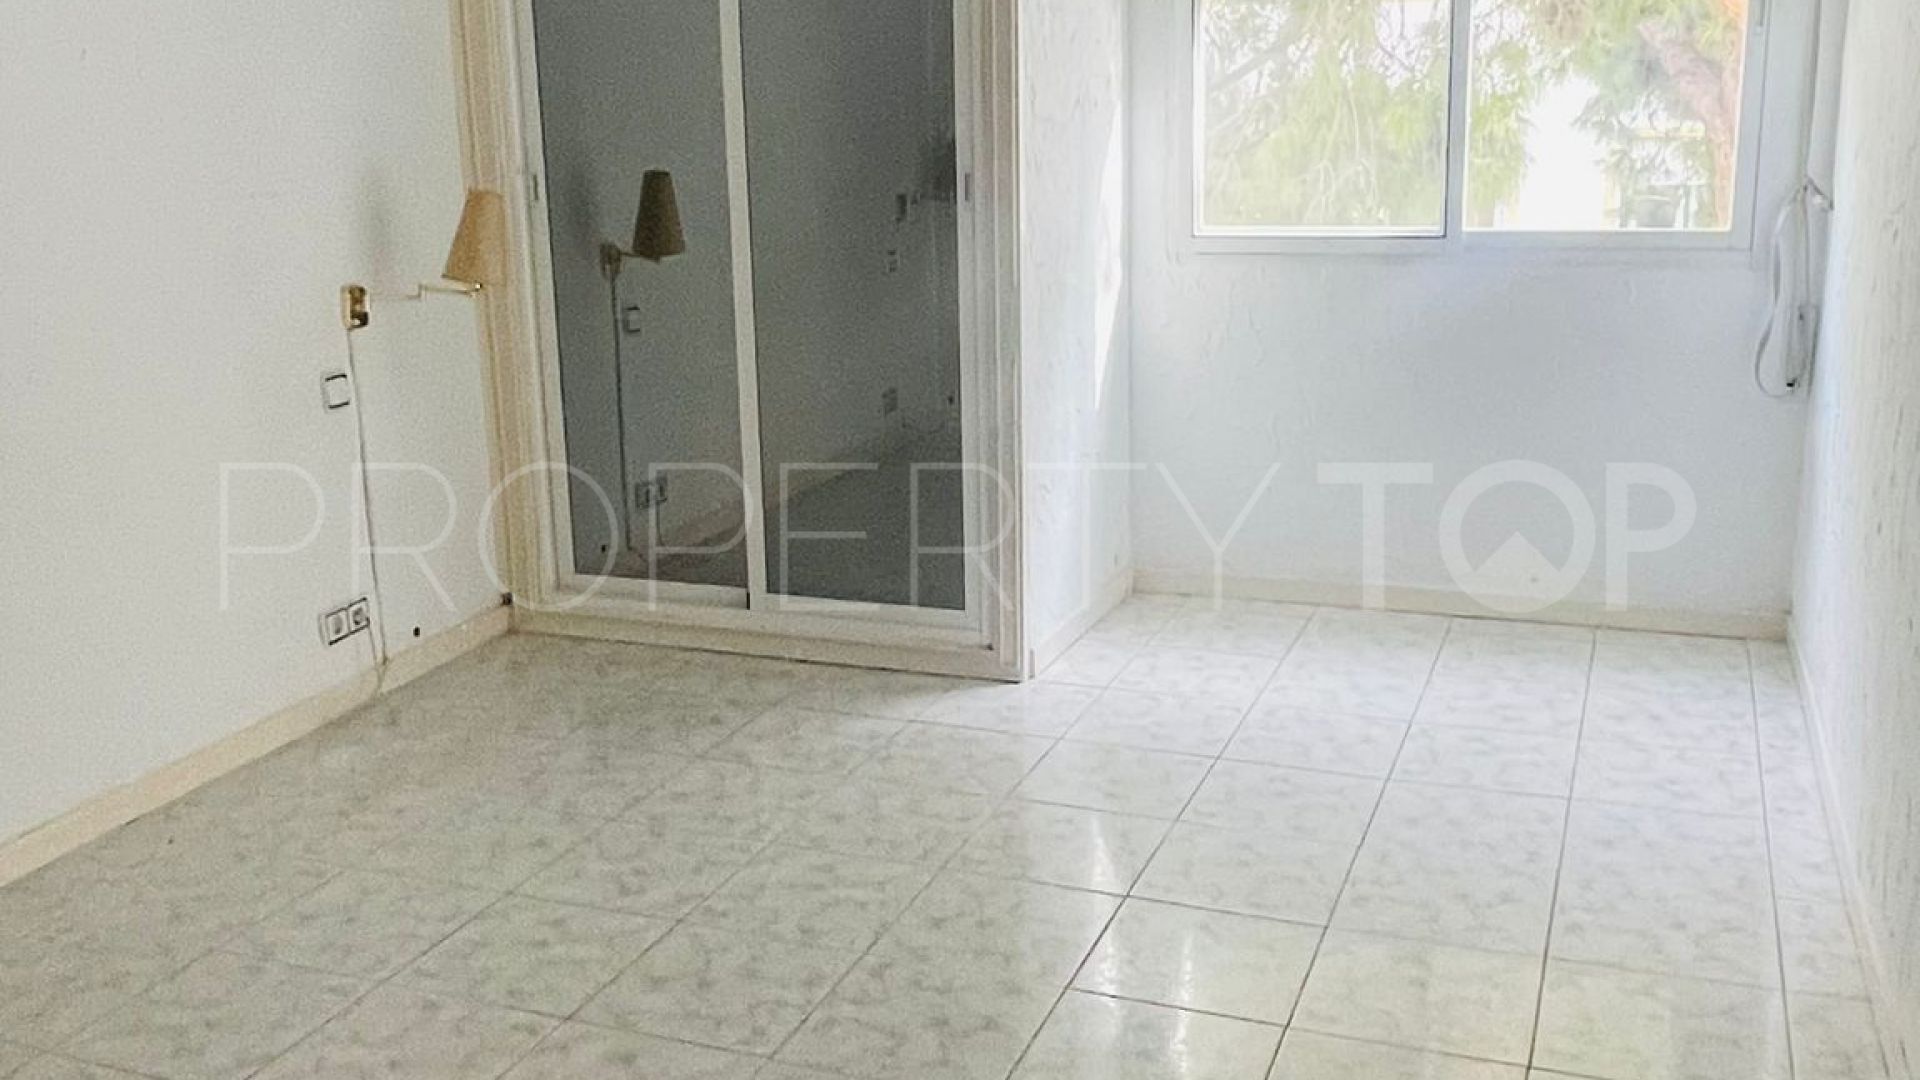 For sale apartment with 3 bedrooms in S. Pedro Centro